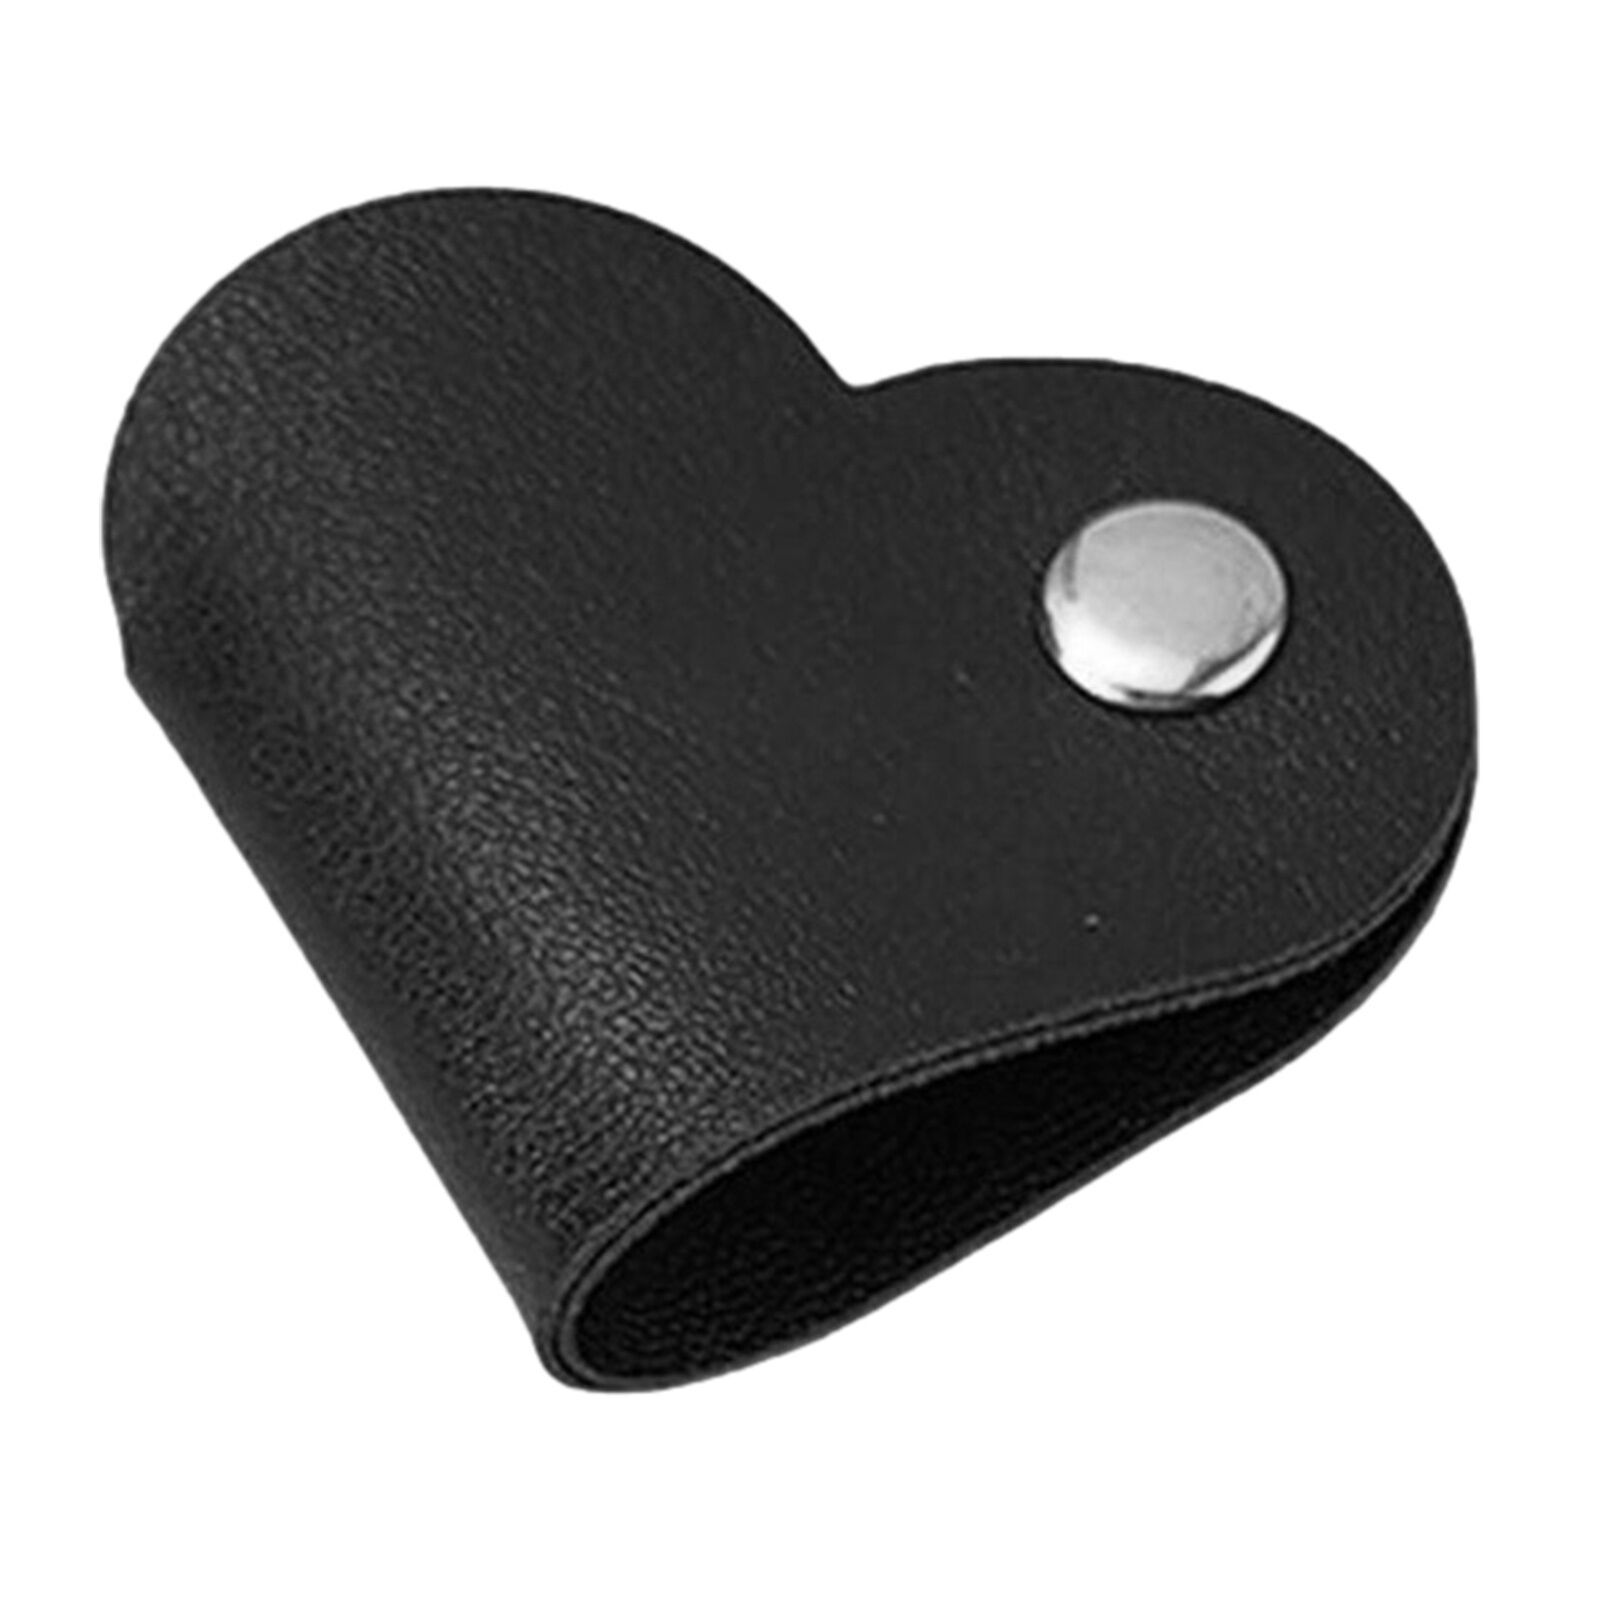 Cute Heart Cord Organizer Portable PU Leather Heart Styling Cable Organizer 